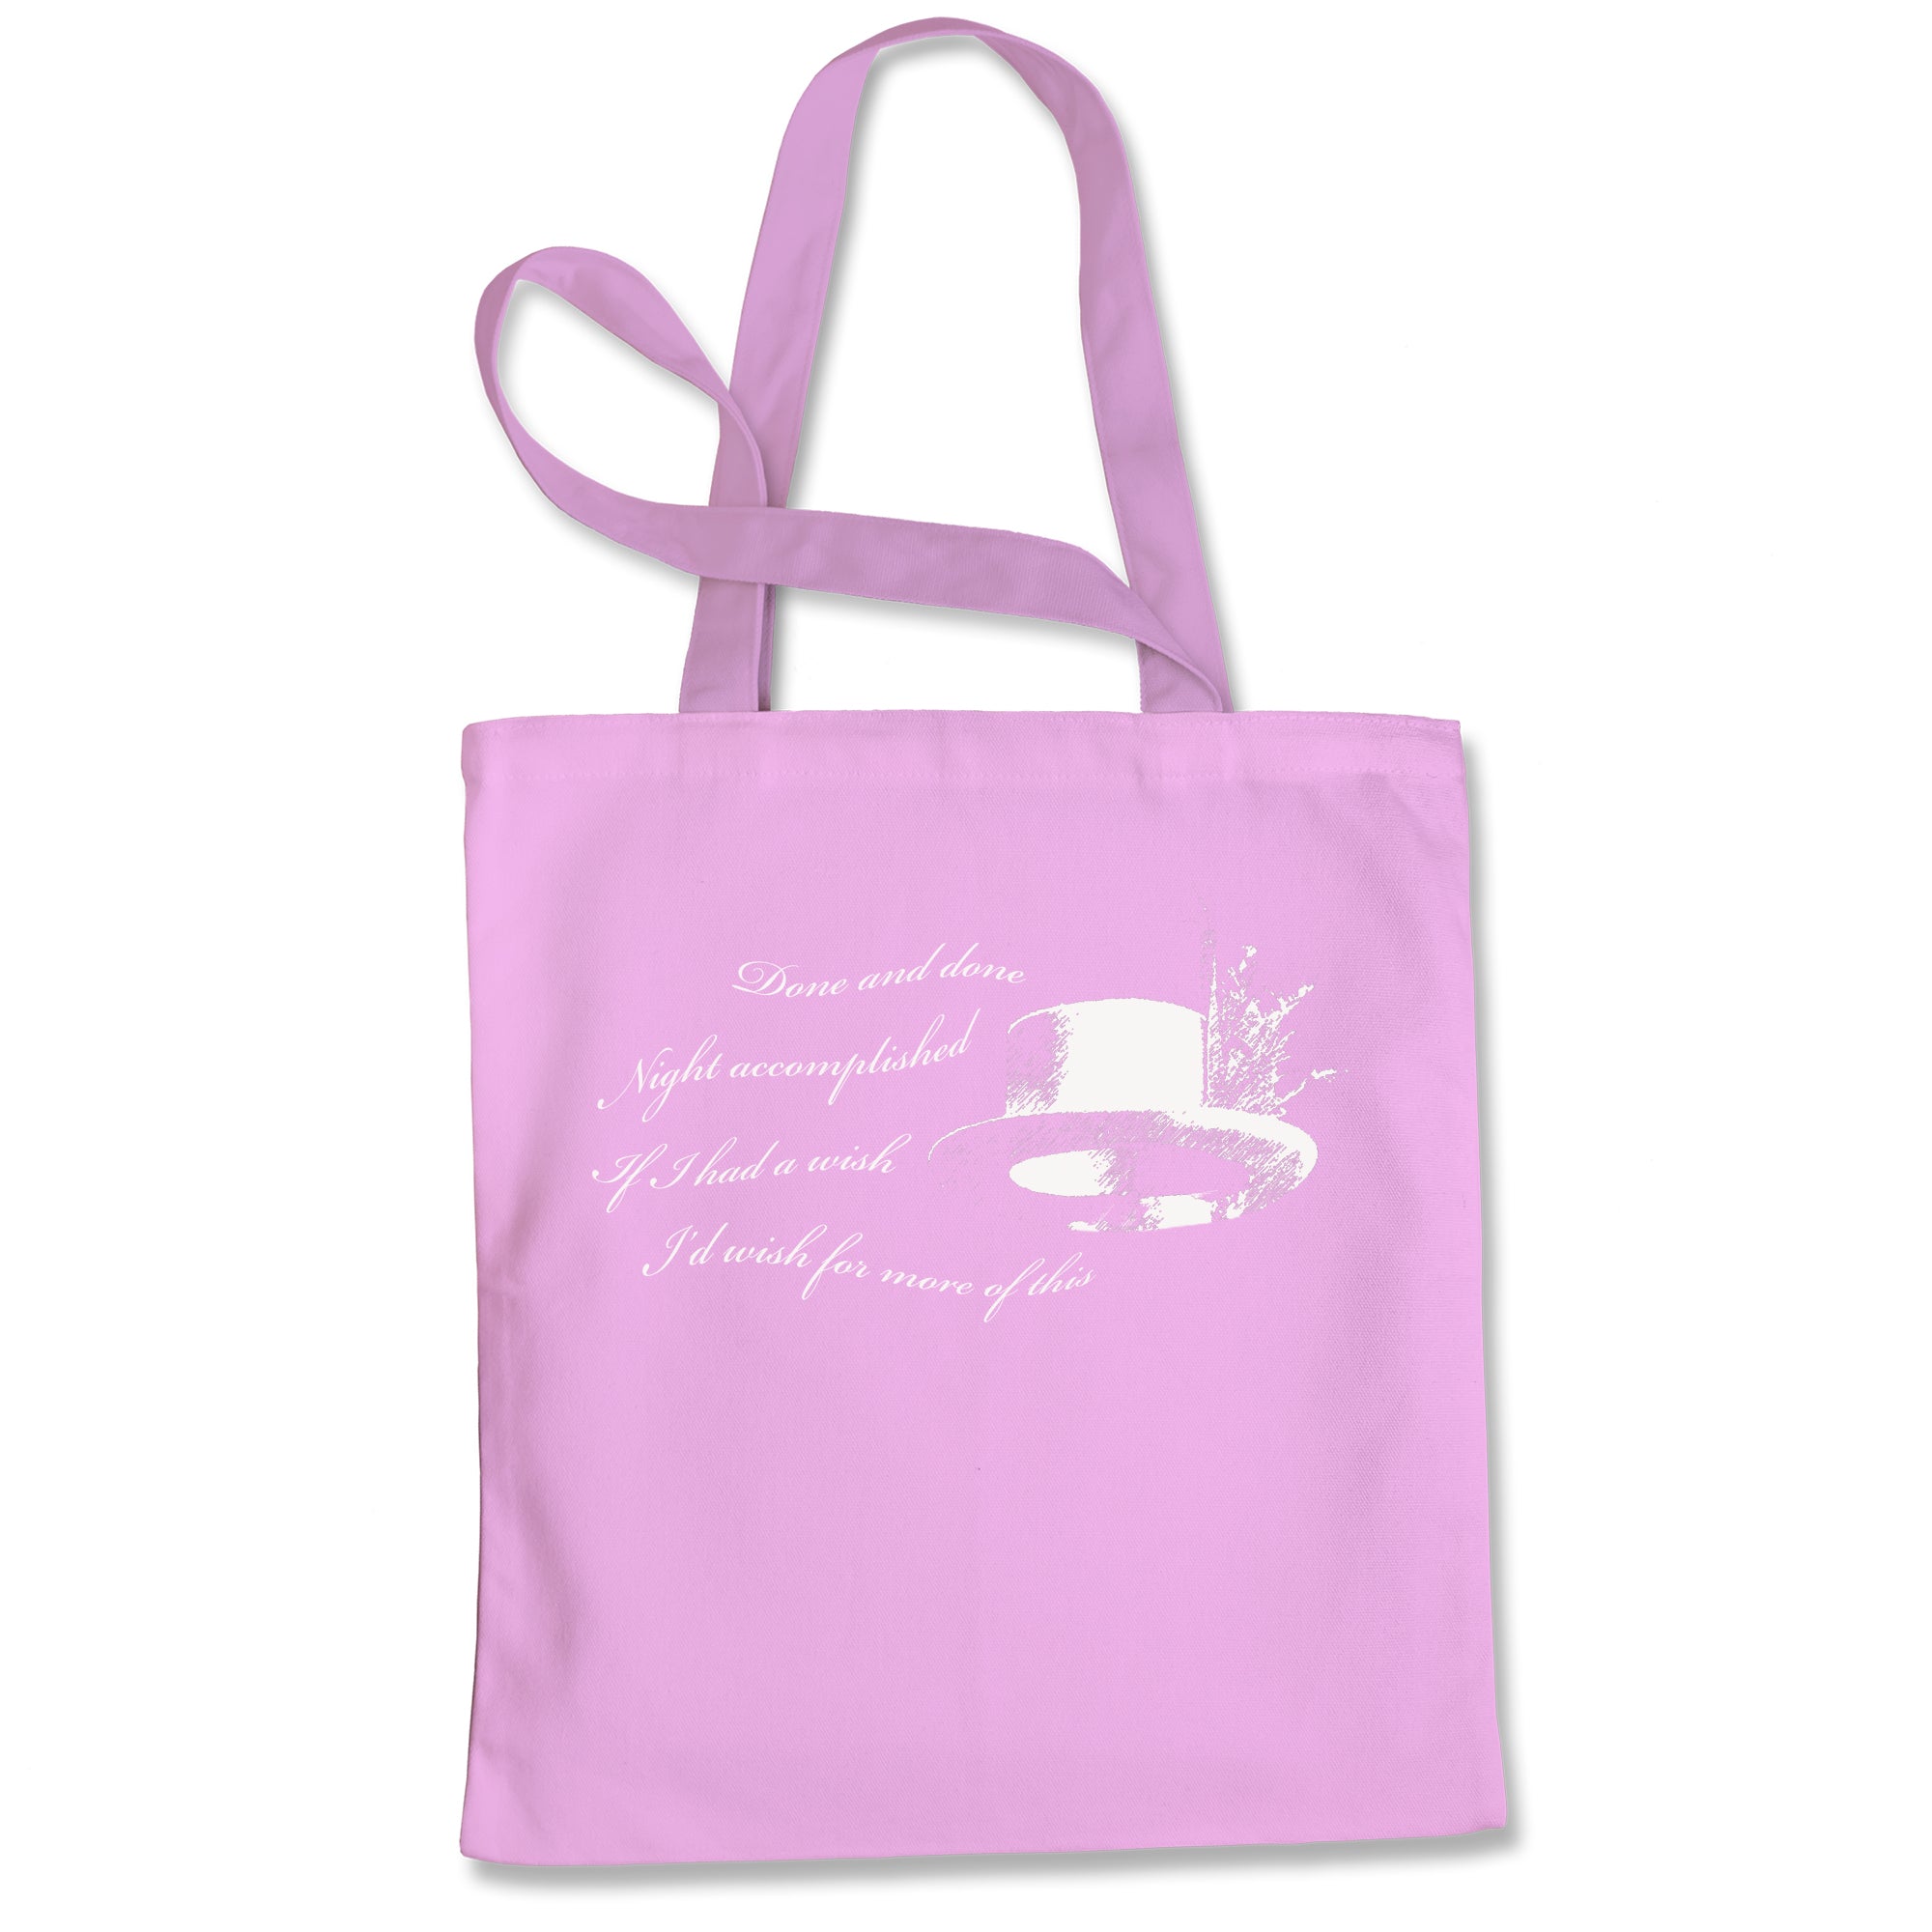 Done and Done Tote Bag